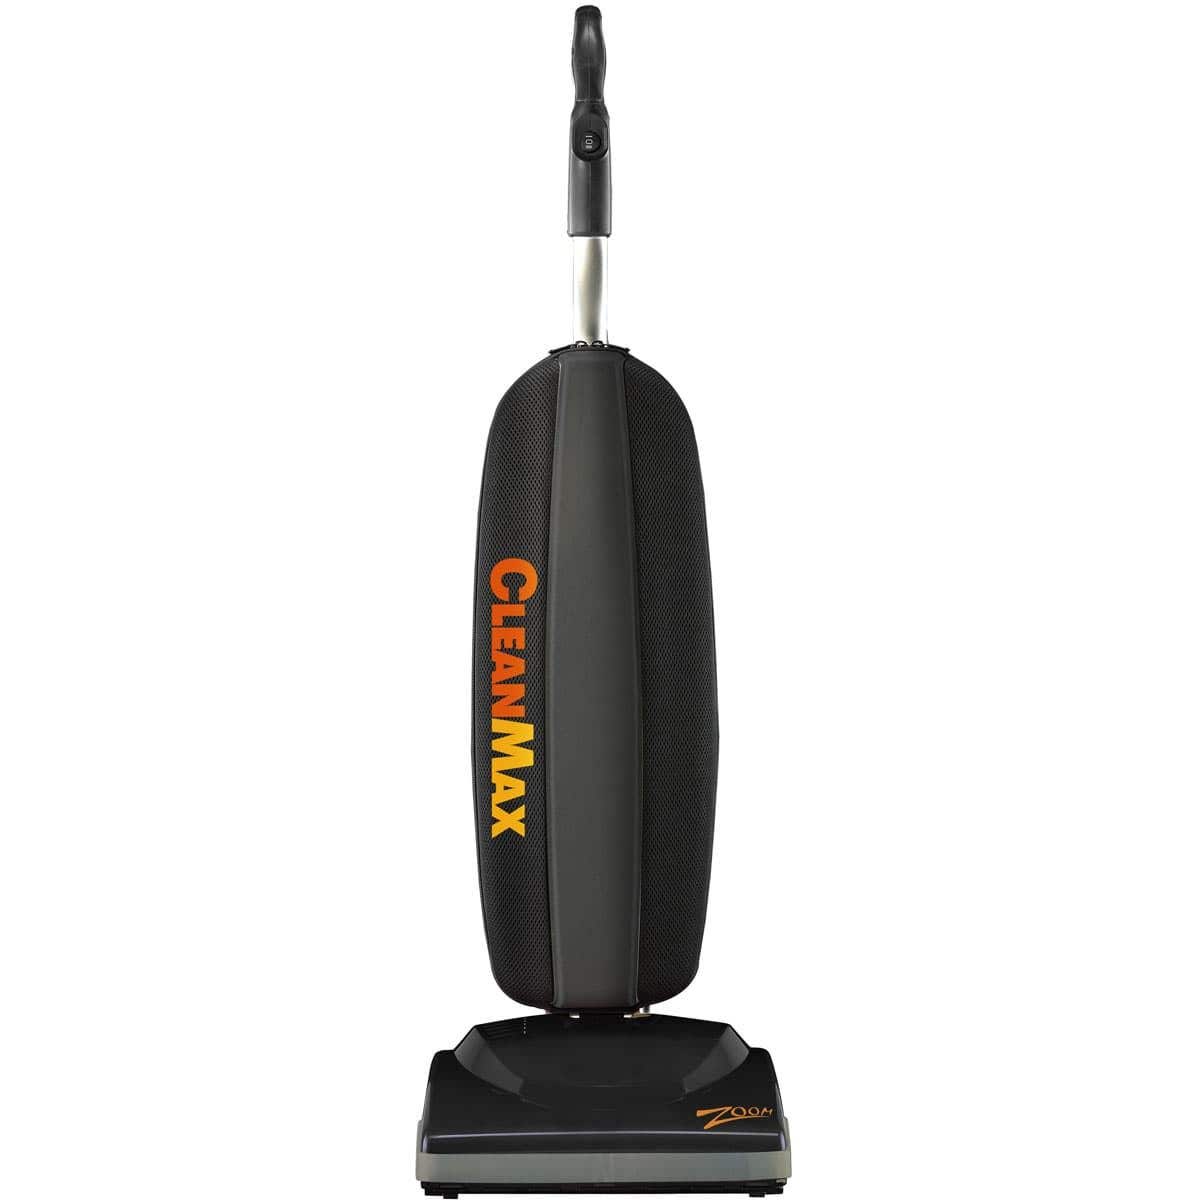 CleanMax Zoom Ultra Light Weight Vacuum With Metal Brushroll CleanMax, Zoom, Ultra, Light, Weight, Cordless, Vacuum, clean, max, metal, brushroll, brush, roll, 